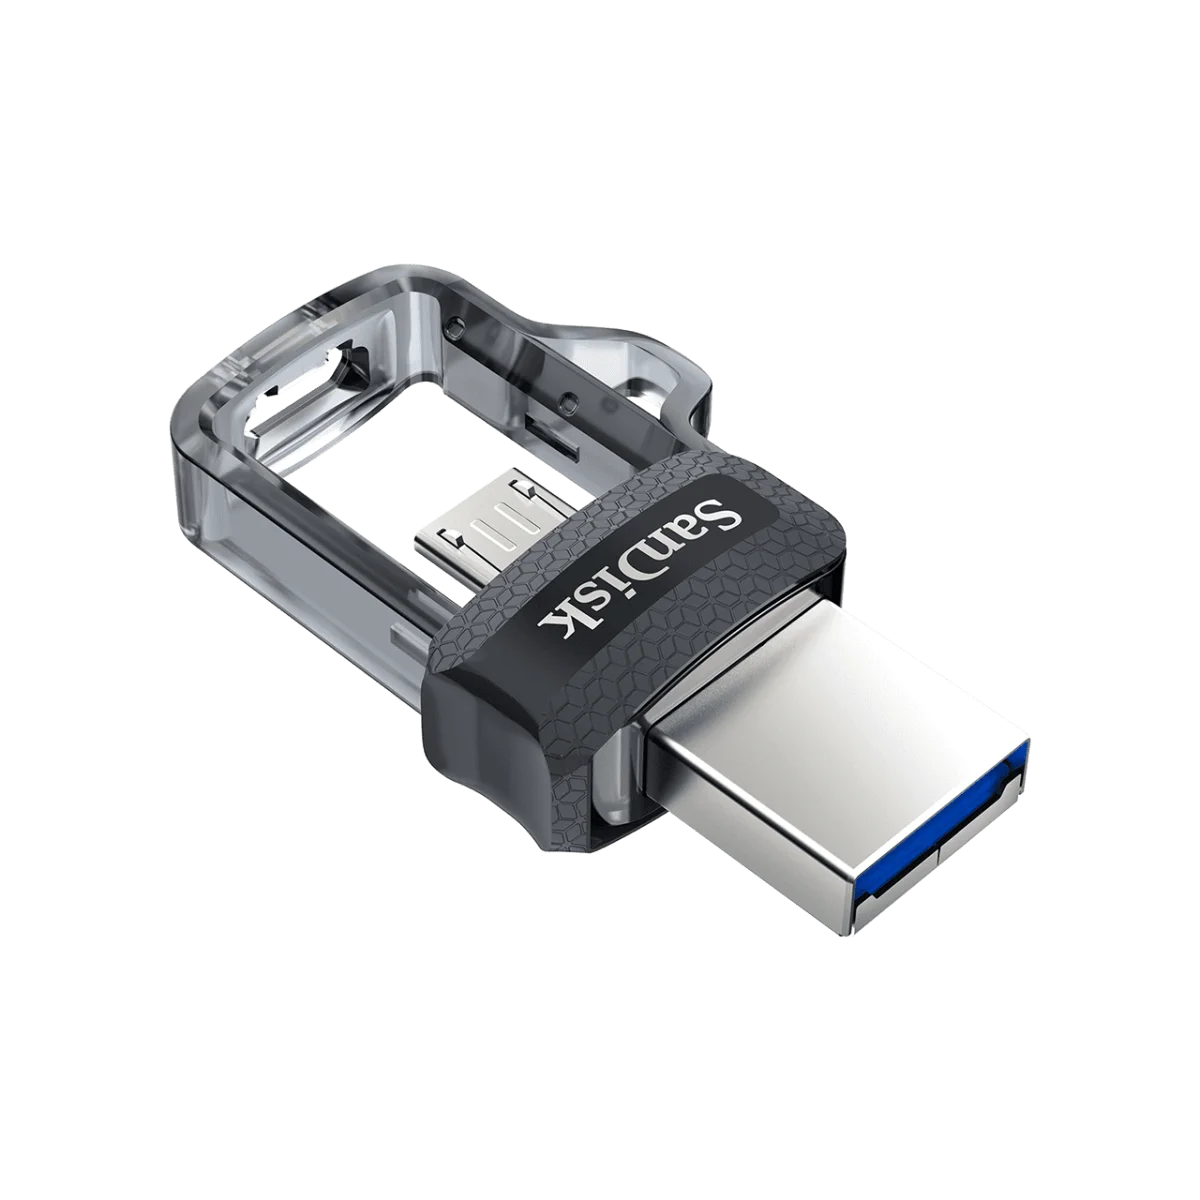 Ultra Dual Drive Usb M 3 Open Angled.png.thumb .1280.1280 Sandisk &Lt;Div Class=&Quot;Active&Quot; Data-Sku=&Quot;Sddd3-016G-A46&Quot;&Gt; &Lt;H1&Gt;Instantly Free Up Space On Your Android Smartphone&Lt;/H1&Gt; &Lt;Div Class=&Quot;Inheritpara Mb-4&Quot;&Gt; The Sandisk Ultra® Dual Drive M3.0 Makes It Easy To Transfer Content From Your Phone To Your Computer. With A Micro-Usb Connector On One End And A Usb 3.0 Connector On The Other, The Drive Lets You Move Content Easily Between Your Devices—From Your Android™ Smartphone Or Tablet To Your Laptop, Pc Or Mac Computer&Lt;A Class=&Quot;Disclosure&Quot; Href=&Quot;Https://Shop.westerndigital.com/Products/Usb-Flash-Drives/Sandisk-Ultra-Dual-Drive-M30-Usb-3-0-Micro-Usb#Disclosures&Quot; Target=&Quot;_Self&Quot; Rel=&Quot;Noopener Noreferrer&Quot; Aria-Labelledby=&Quot;Disclosures&Quot;&Gt;&Lt;Sup&Gt;1&Lt;/Sup&Gt;&Lt;/A&Gt;. The Usb 3.0 Connector Is High-Performance And Backward-Compatible With Usb 2.0 Ports. The Sandisk® Memory Zone App&Lt;A Class=&Quot;Disclosure&Quot; Href=&Quot;Https://Shop.westerndigital.com/Products/Usb-Flash-Drives/Sandisk-Ultra-Dual-Drive-M30-Usb-3-0-Micro-Usb#Disclosures&Quot; Target=&Quot;_Self&Quot; Rel=&Quot;Noopener Noreferrer&Quot; Aria-Labelledby=&Quot;Disclosures&Quot;&Gt;&Lt;Sup&Gt;2&Lt;/Sup&Gt;&Lt;/A&Gt; For Android (Available On Google Play) Helps You Manage Your Device’s Memory And Your Content. &Lt;Strong&Gt;Warranty&Lt;/Strong&Gt; The Sandisk Ultra Flair Usb 3.0 Flash Drive Is Backed By A Five-Year Manufacturer Warranty&Lt;A Class=&Quot;Disclosure&Quot; Href=&Quot;Https://Shop.westerndigital.com/Products/Usb-Flash-Drives/Sandisk-Ultra-Flair-Usb-3-0#Disclosures&Quot; Target=&Quot;_Self&Quot; Rel=&Quot;Noopener Noreferrer&Quot; Aria-Labelledby=&Quot;Disclosures&Quot;&Gt;&Lt;Sup&Gt;2&Lt;/Sup&Gt;&Lt;/A&Gt; &Lt;/Div&Gt; &Lt;/Div&Gt; Sandisk Ultra Dual Drive M3.0 Flash Drive For Android Smartphones (16Gb)